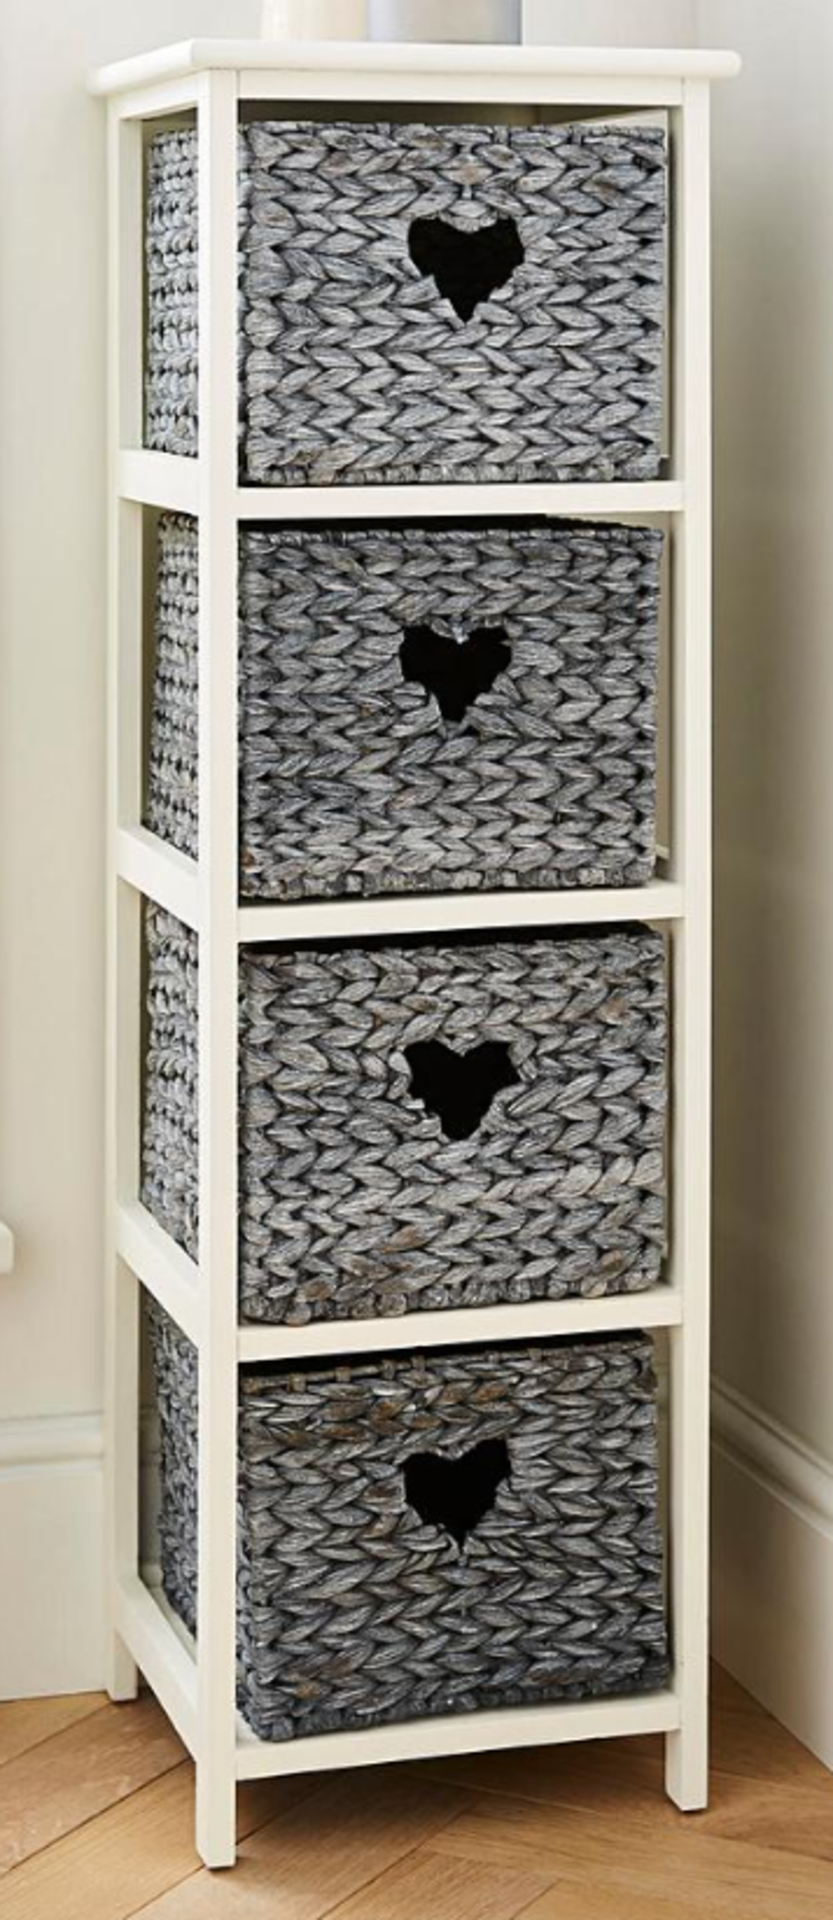 Hyacinth Hearts 4 Drawer Tall unit. - SR46. RRP £151.00. Declutter your home with our stylish